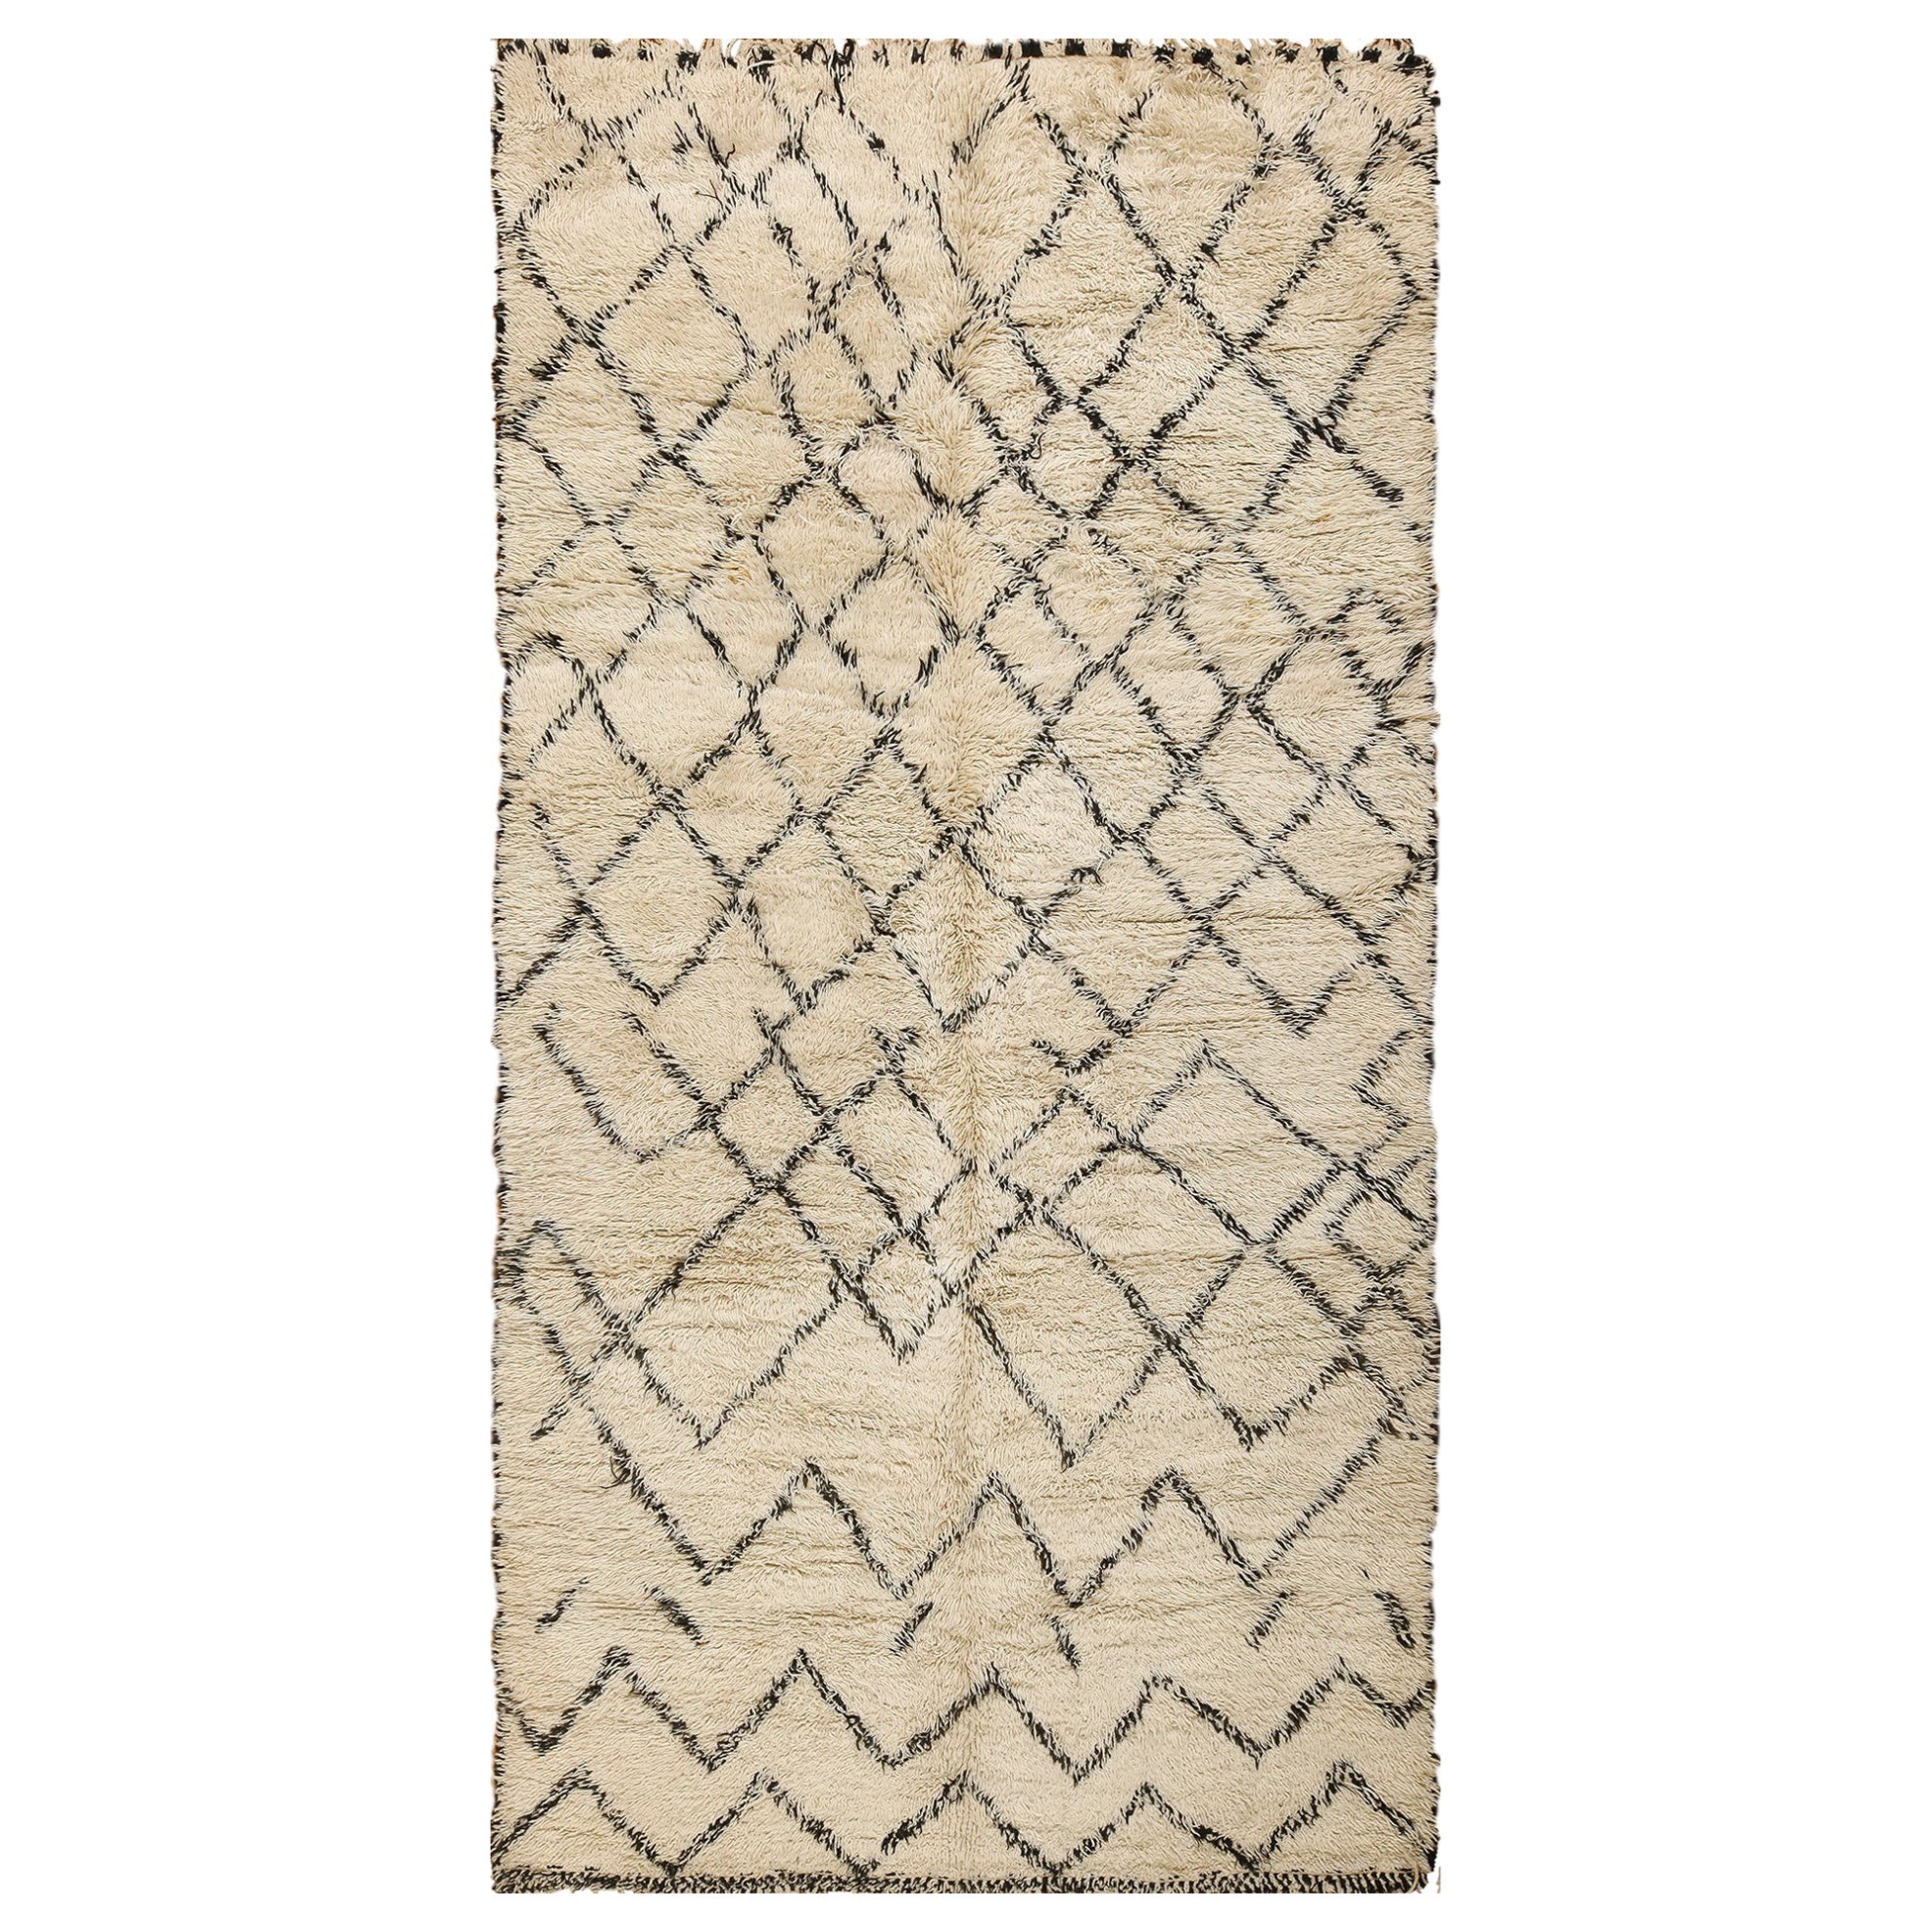 Nazmiyal Collection Vintage Moroccan Berber Carpet. 5 ft 9 in x 10 ft 10 in For Sale